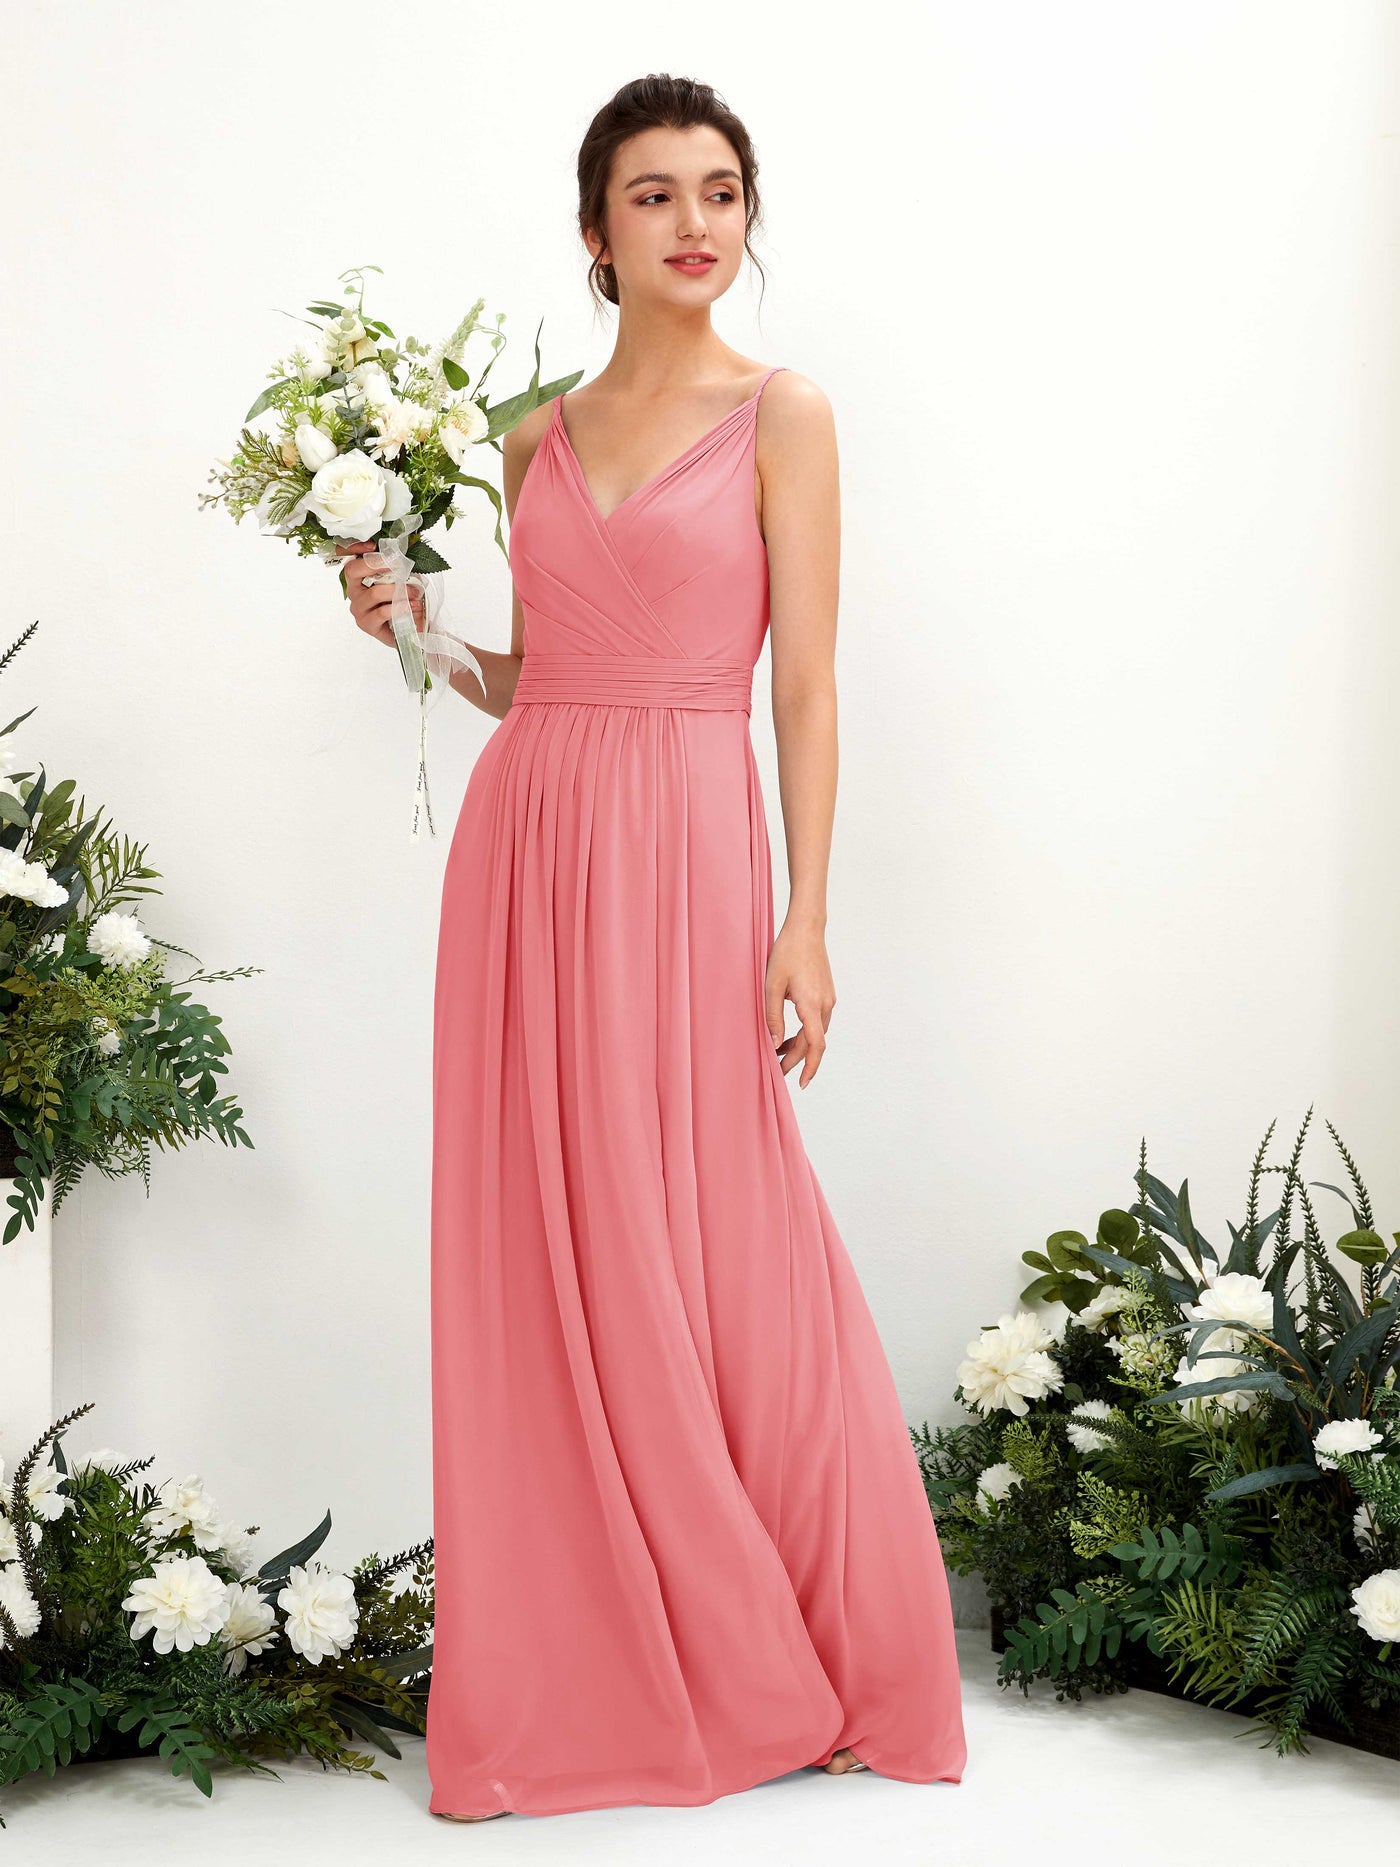 Coral Pink Bridesmaid Dresses Bridesmaid Dress A-line Chiffon Spaghetti-straps Full Length Sleeveless Wedding Party Dress (81223930)#color_coral-pink